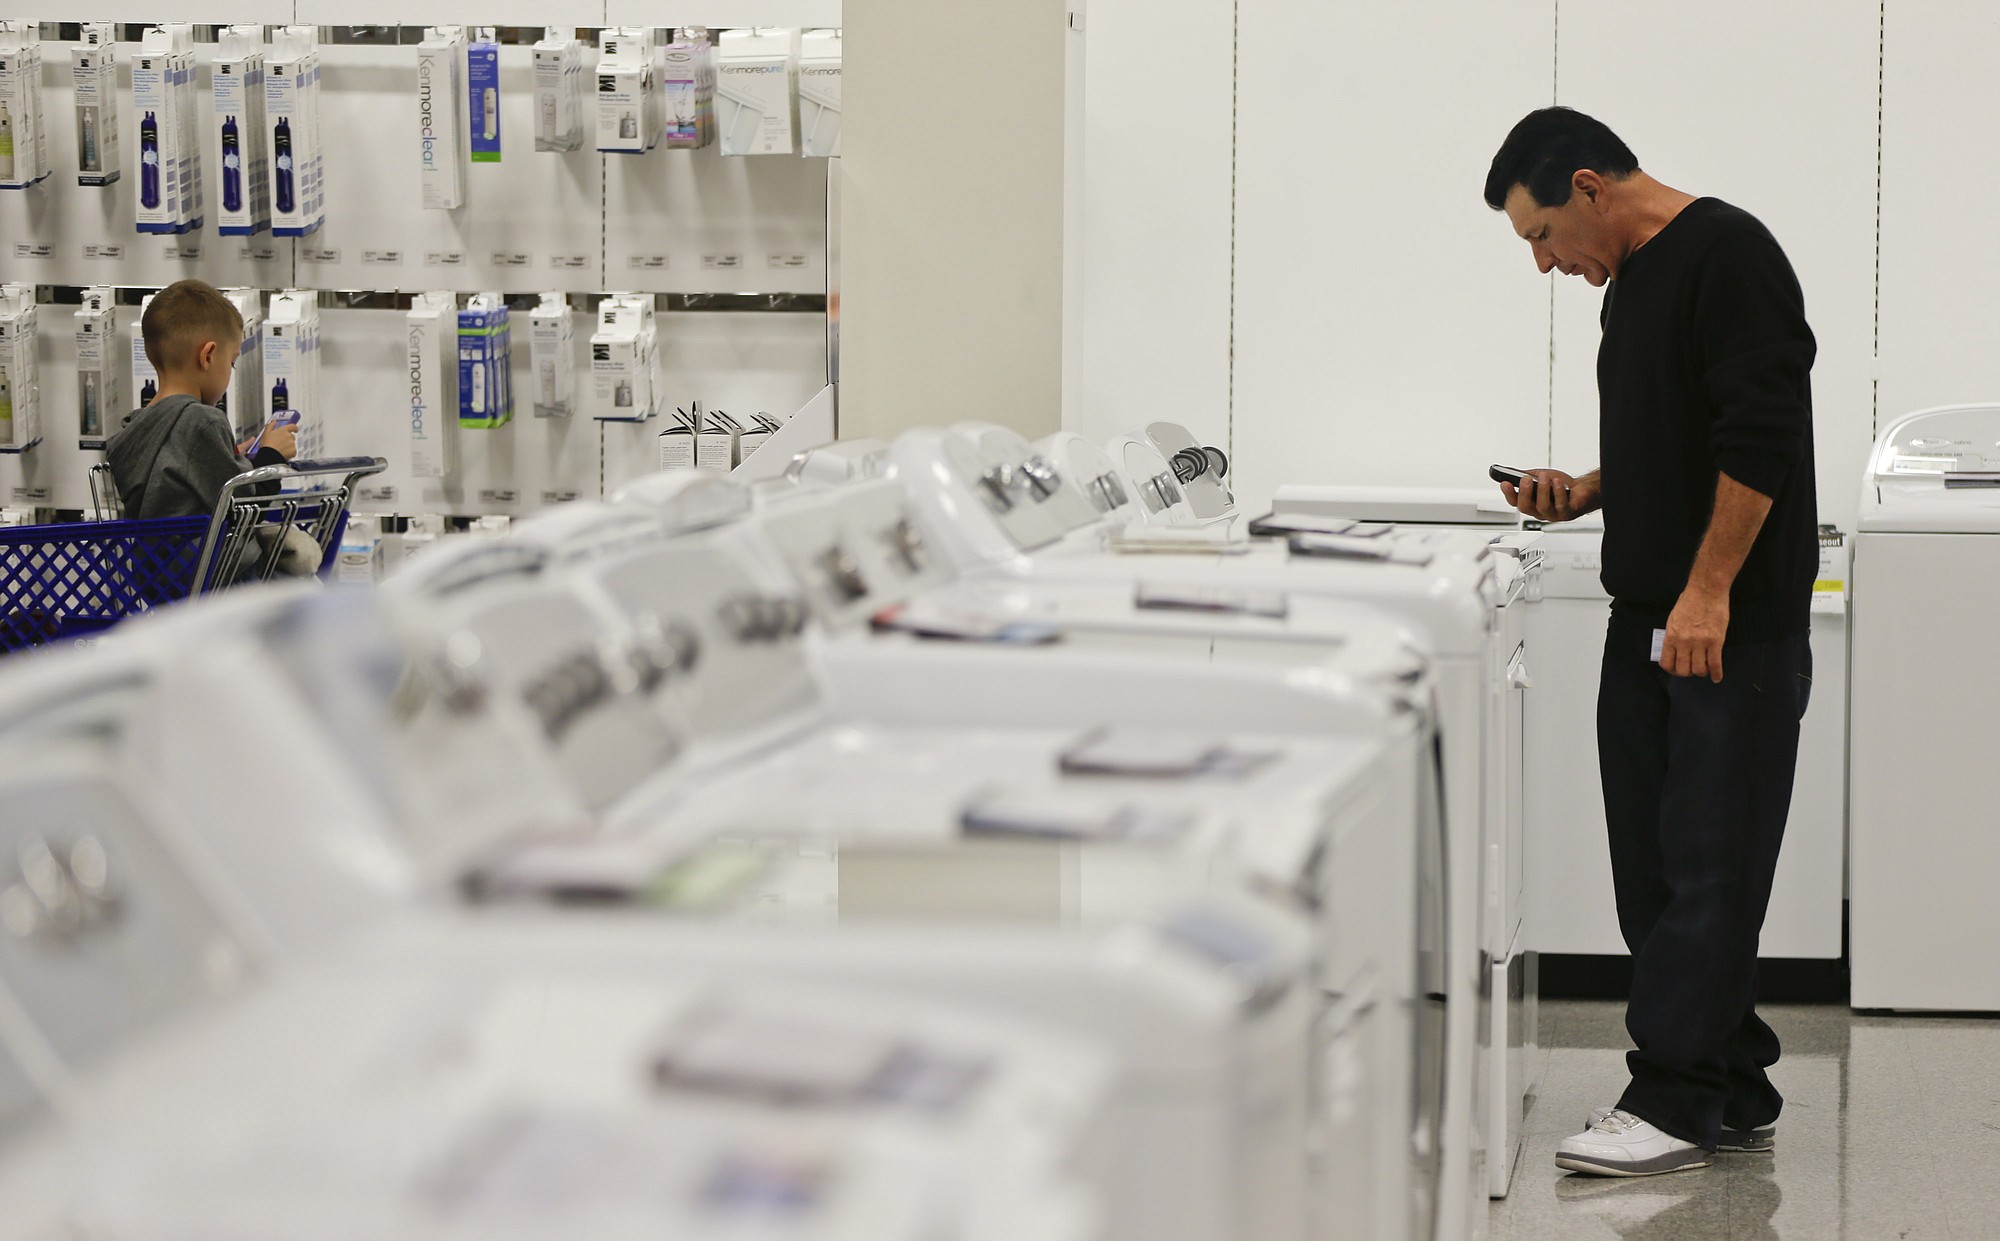 A man examines a row of washers and dryers while shopping at a Sears store in Henderson, Nev.